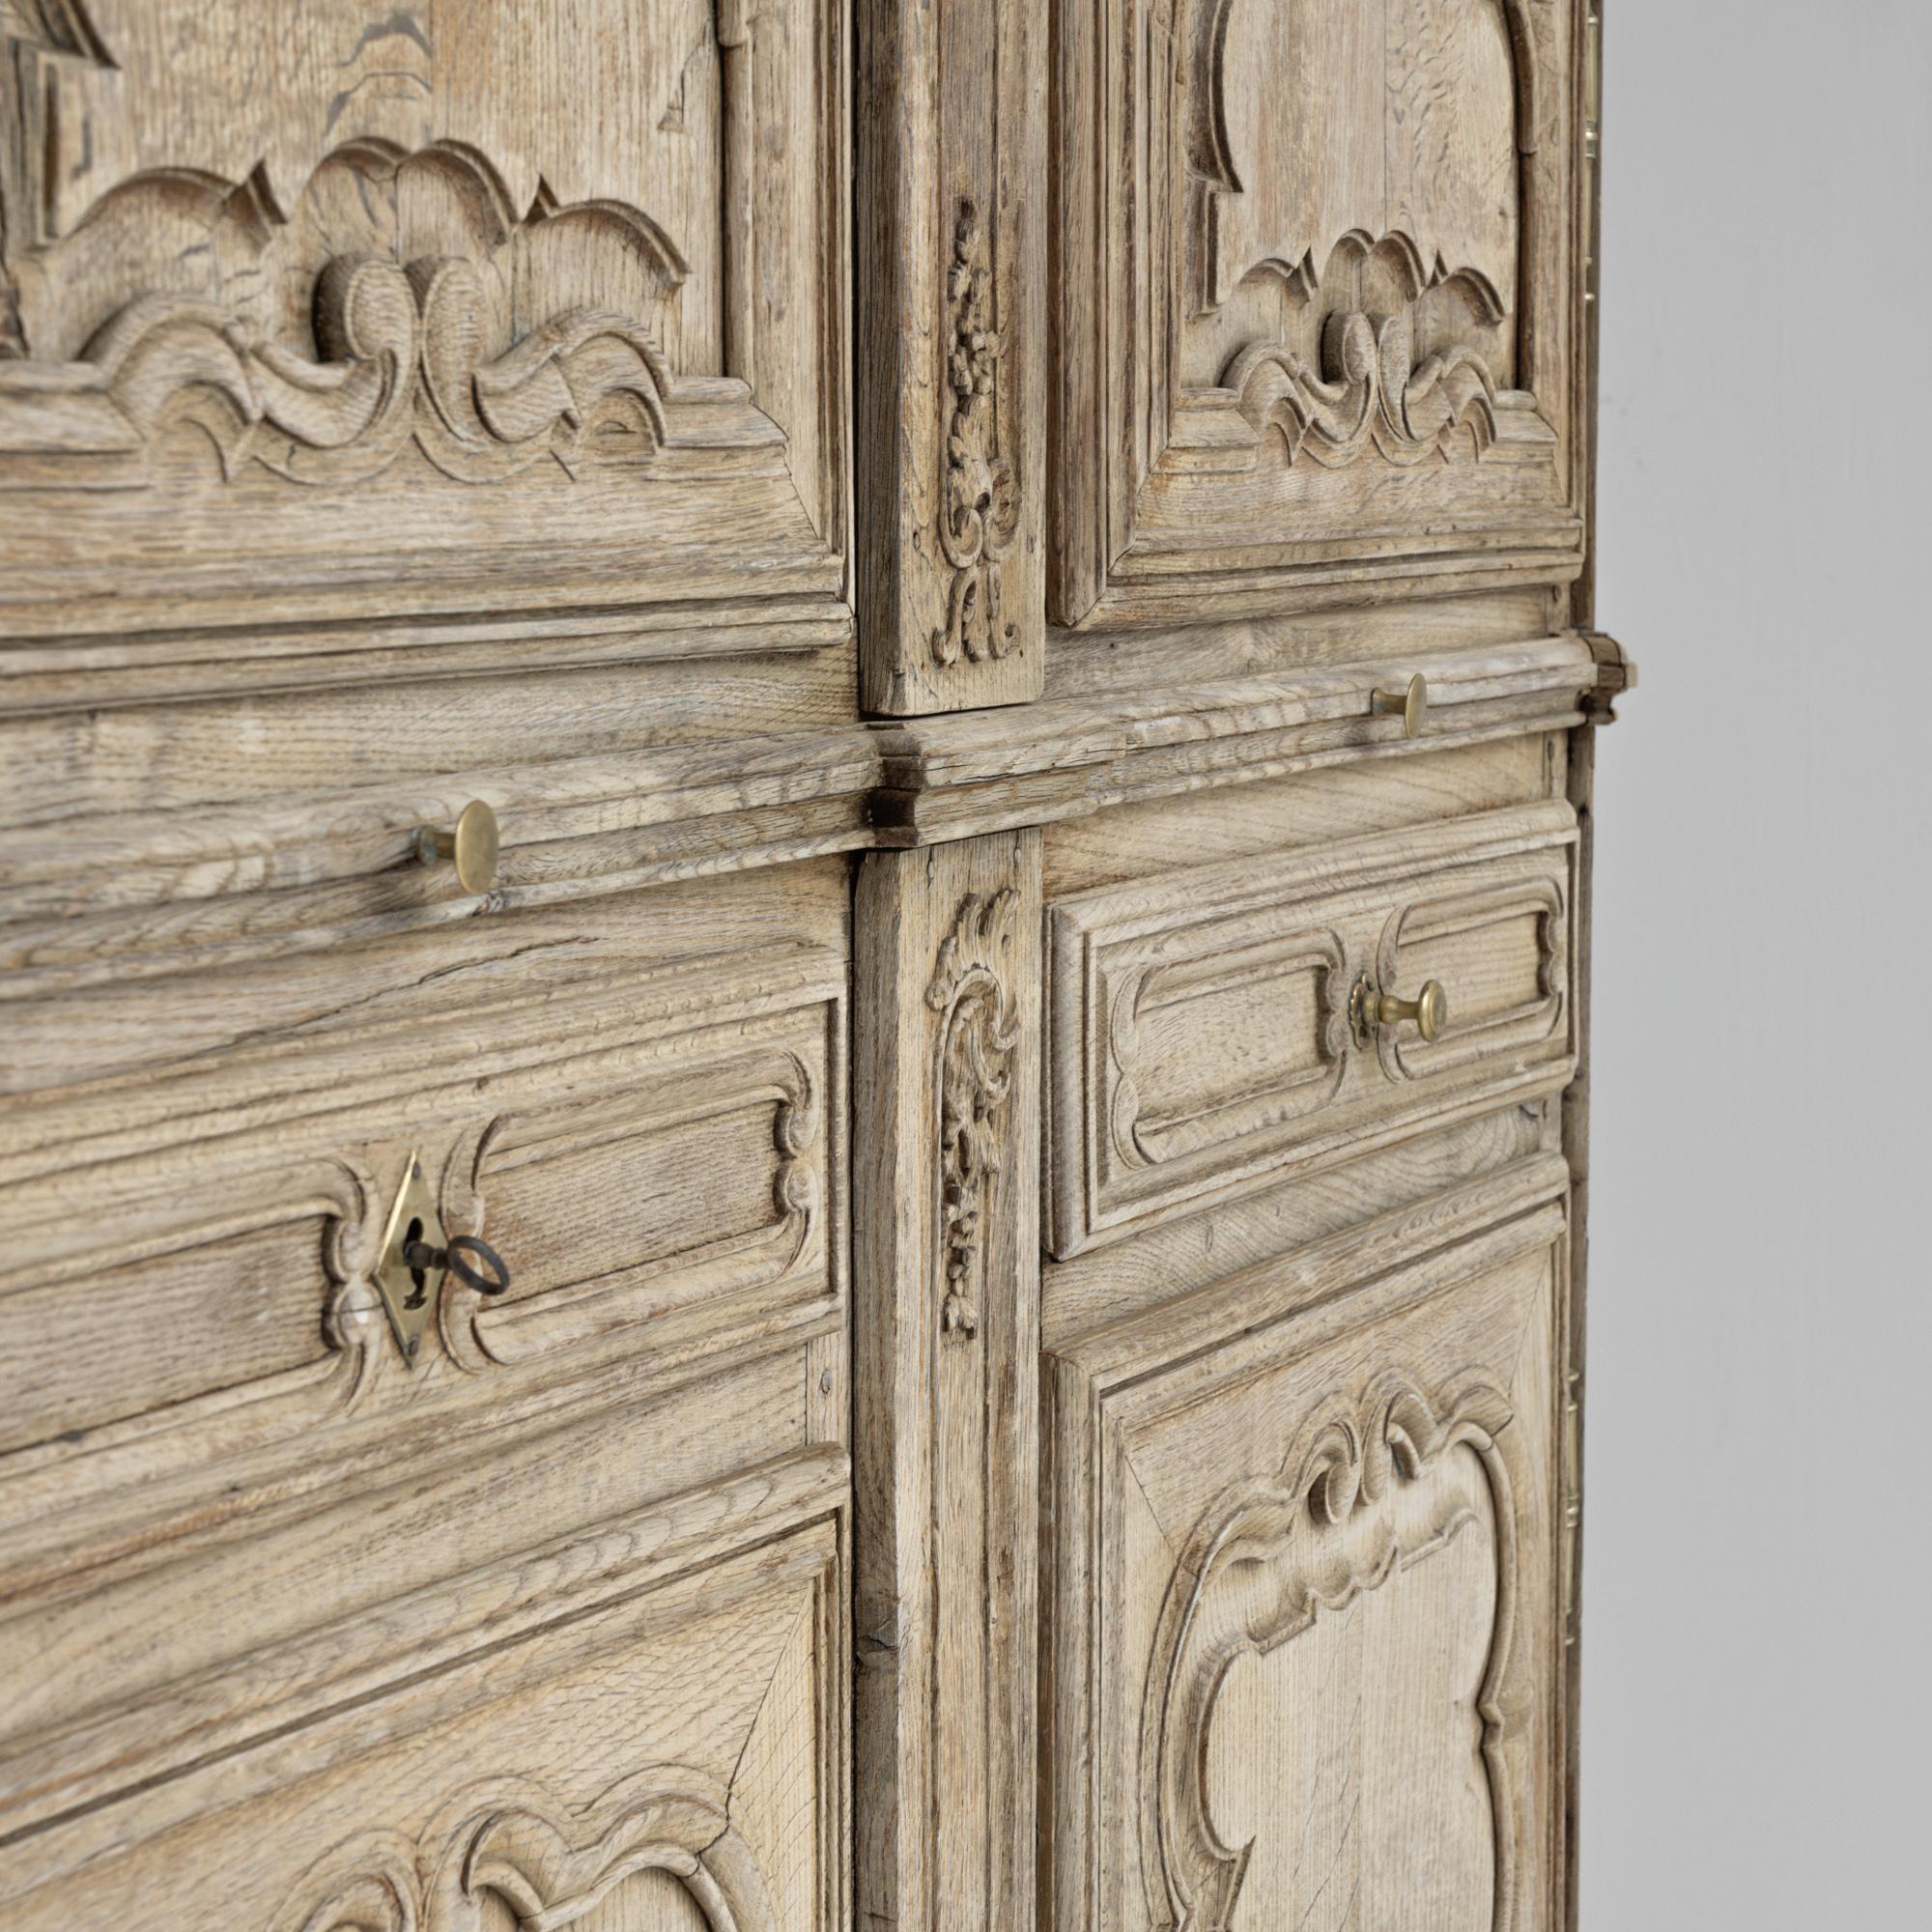 This French Bleached Oak Armoire from the 1800s is a true masterpiece of craftsmanship and refinement. The doors are adorned with intricately carved ornate details that create a stunning visual impact. The armoire has two sets of doors, each divided